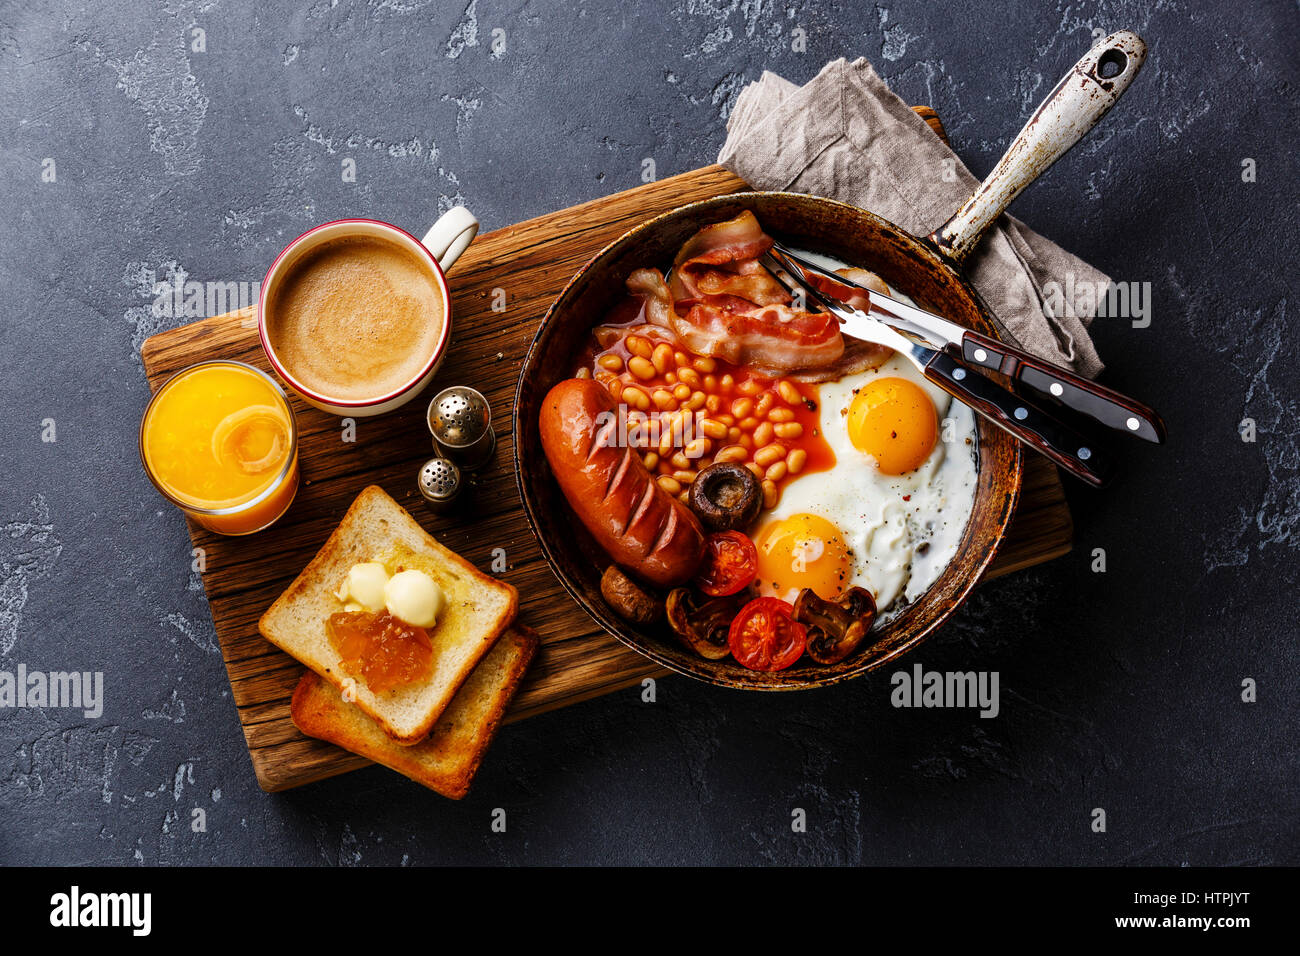 English Breakfast in cooking pan with fried eggs, sausages, bacon, beans, toasts and coffee on dark stone background Stock Photo